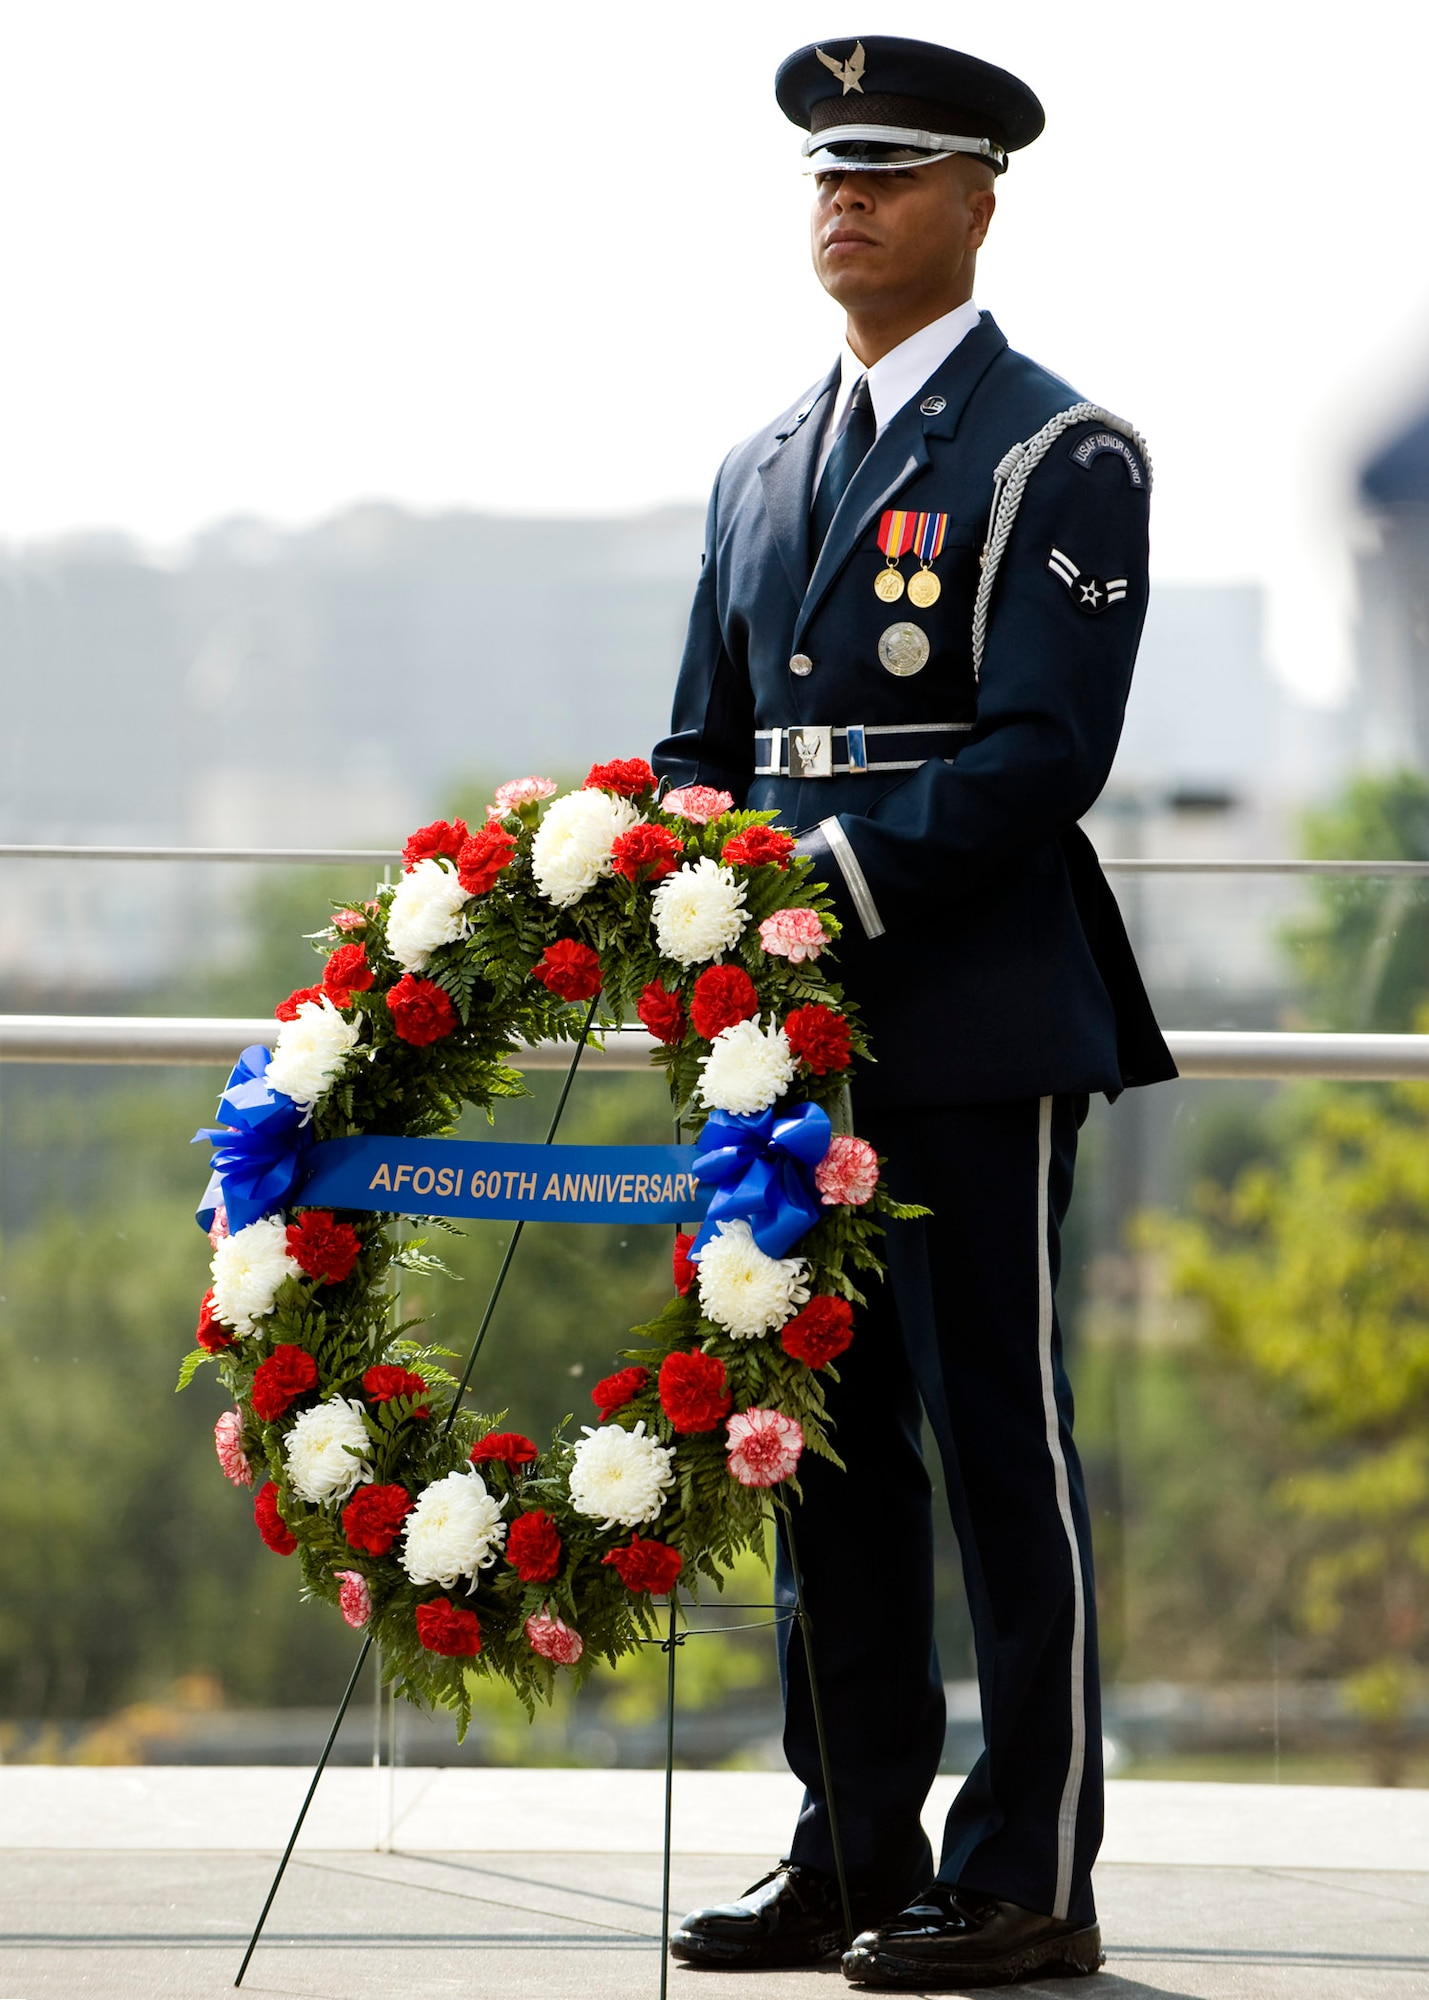 An Airman from the Air Force Honor Guard stands solemn duty behind a wreath placed at the Air Force Memorial in observance of the 60th Anniversary of the Air Force Office of Special Investigations. (U.S. Air Force photo/Mike Hastings)